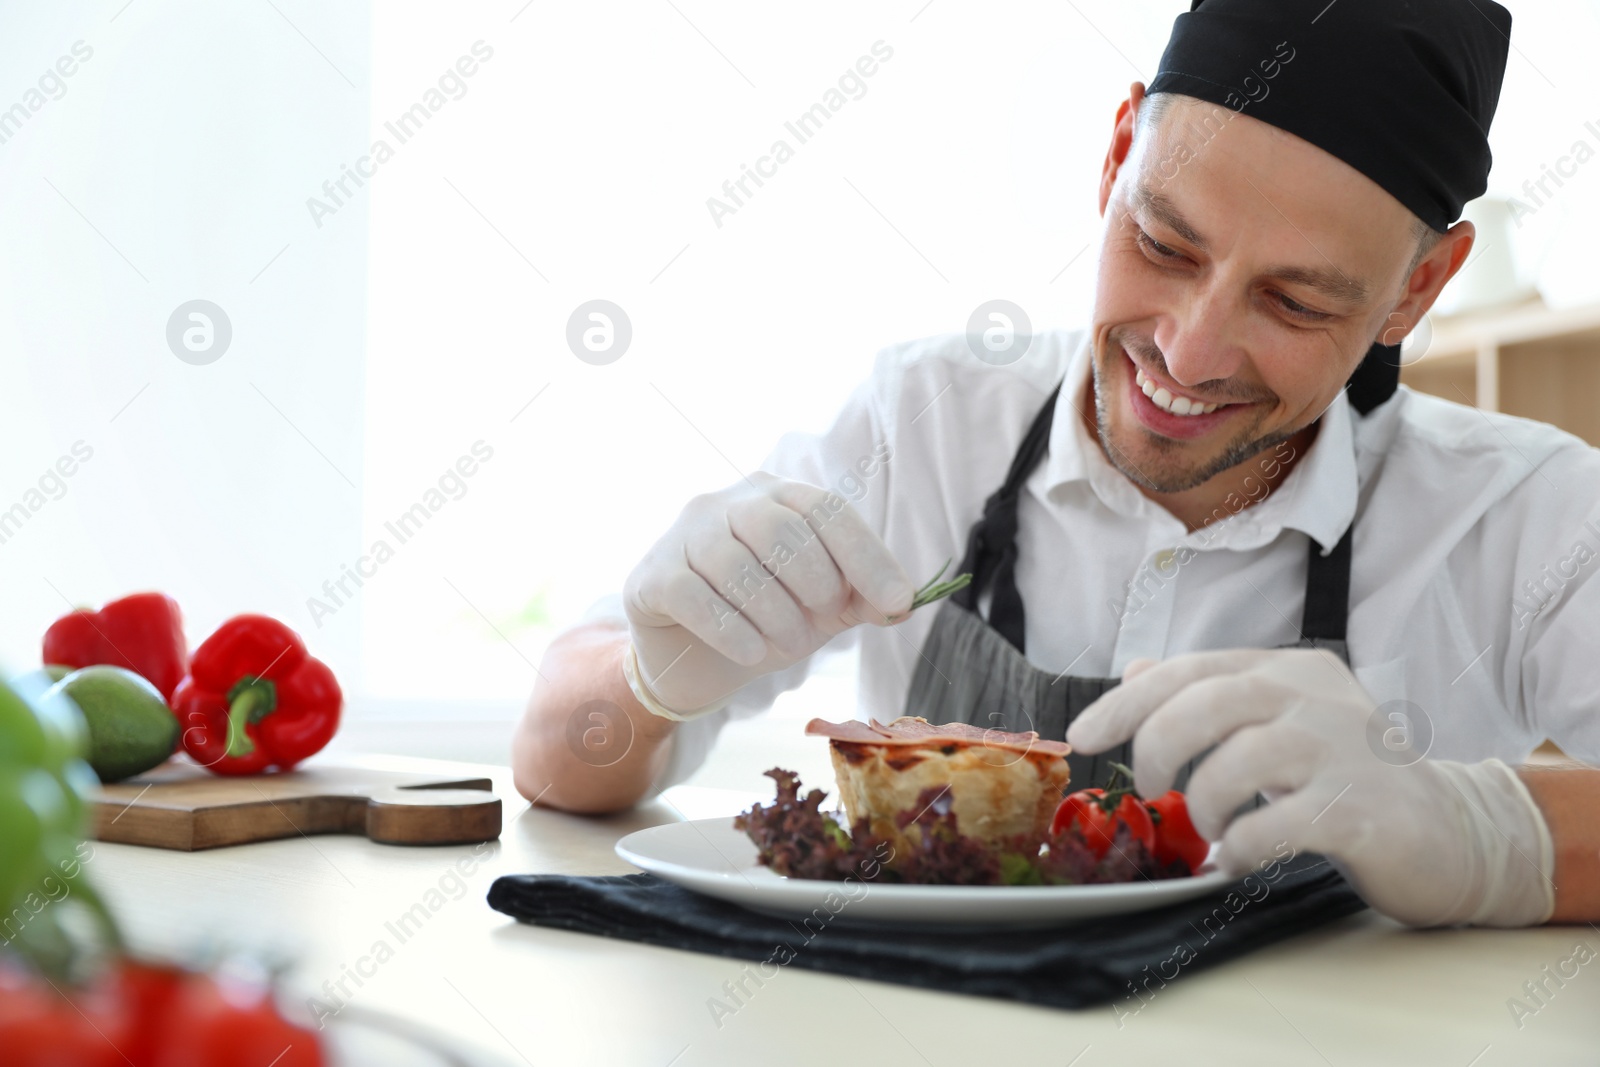 Photo of Professional chef presenting dish on table in kitchen